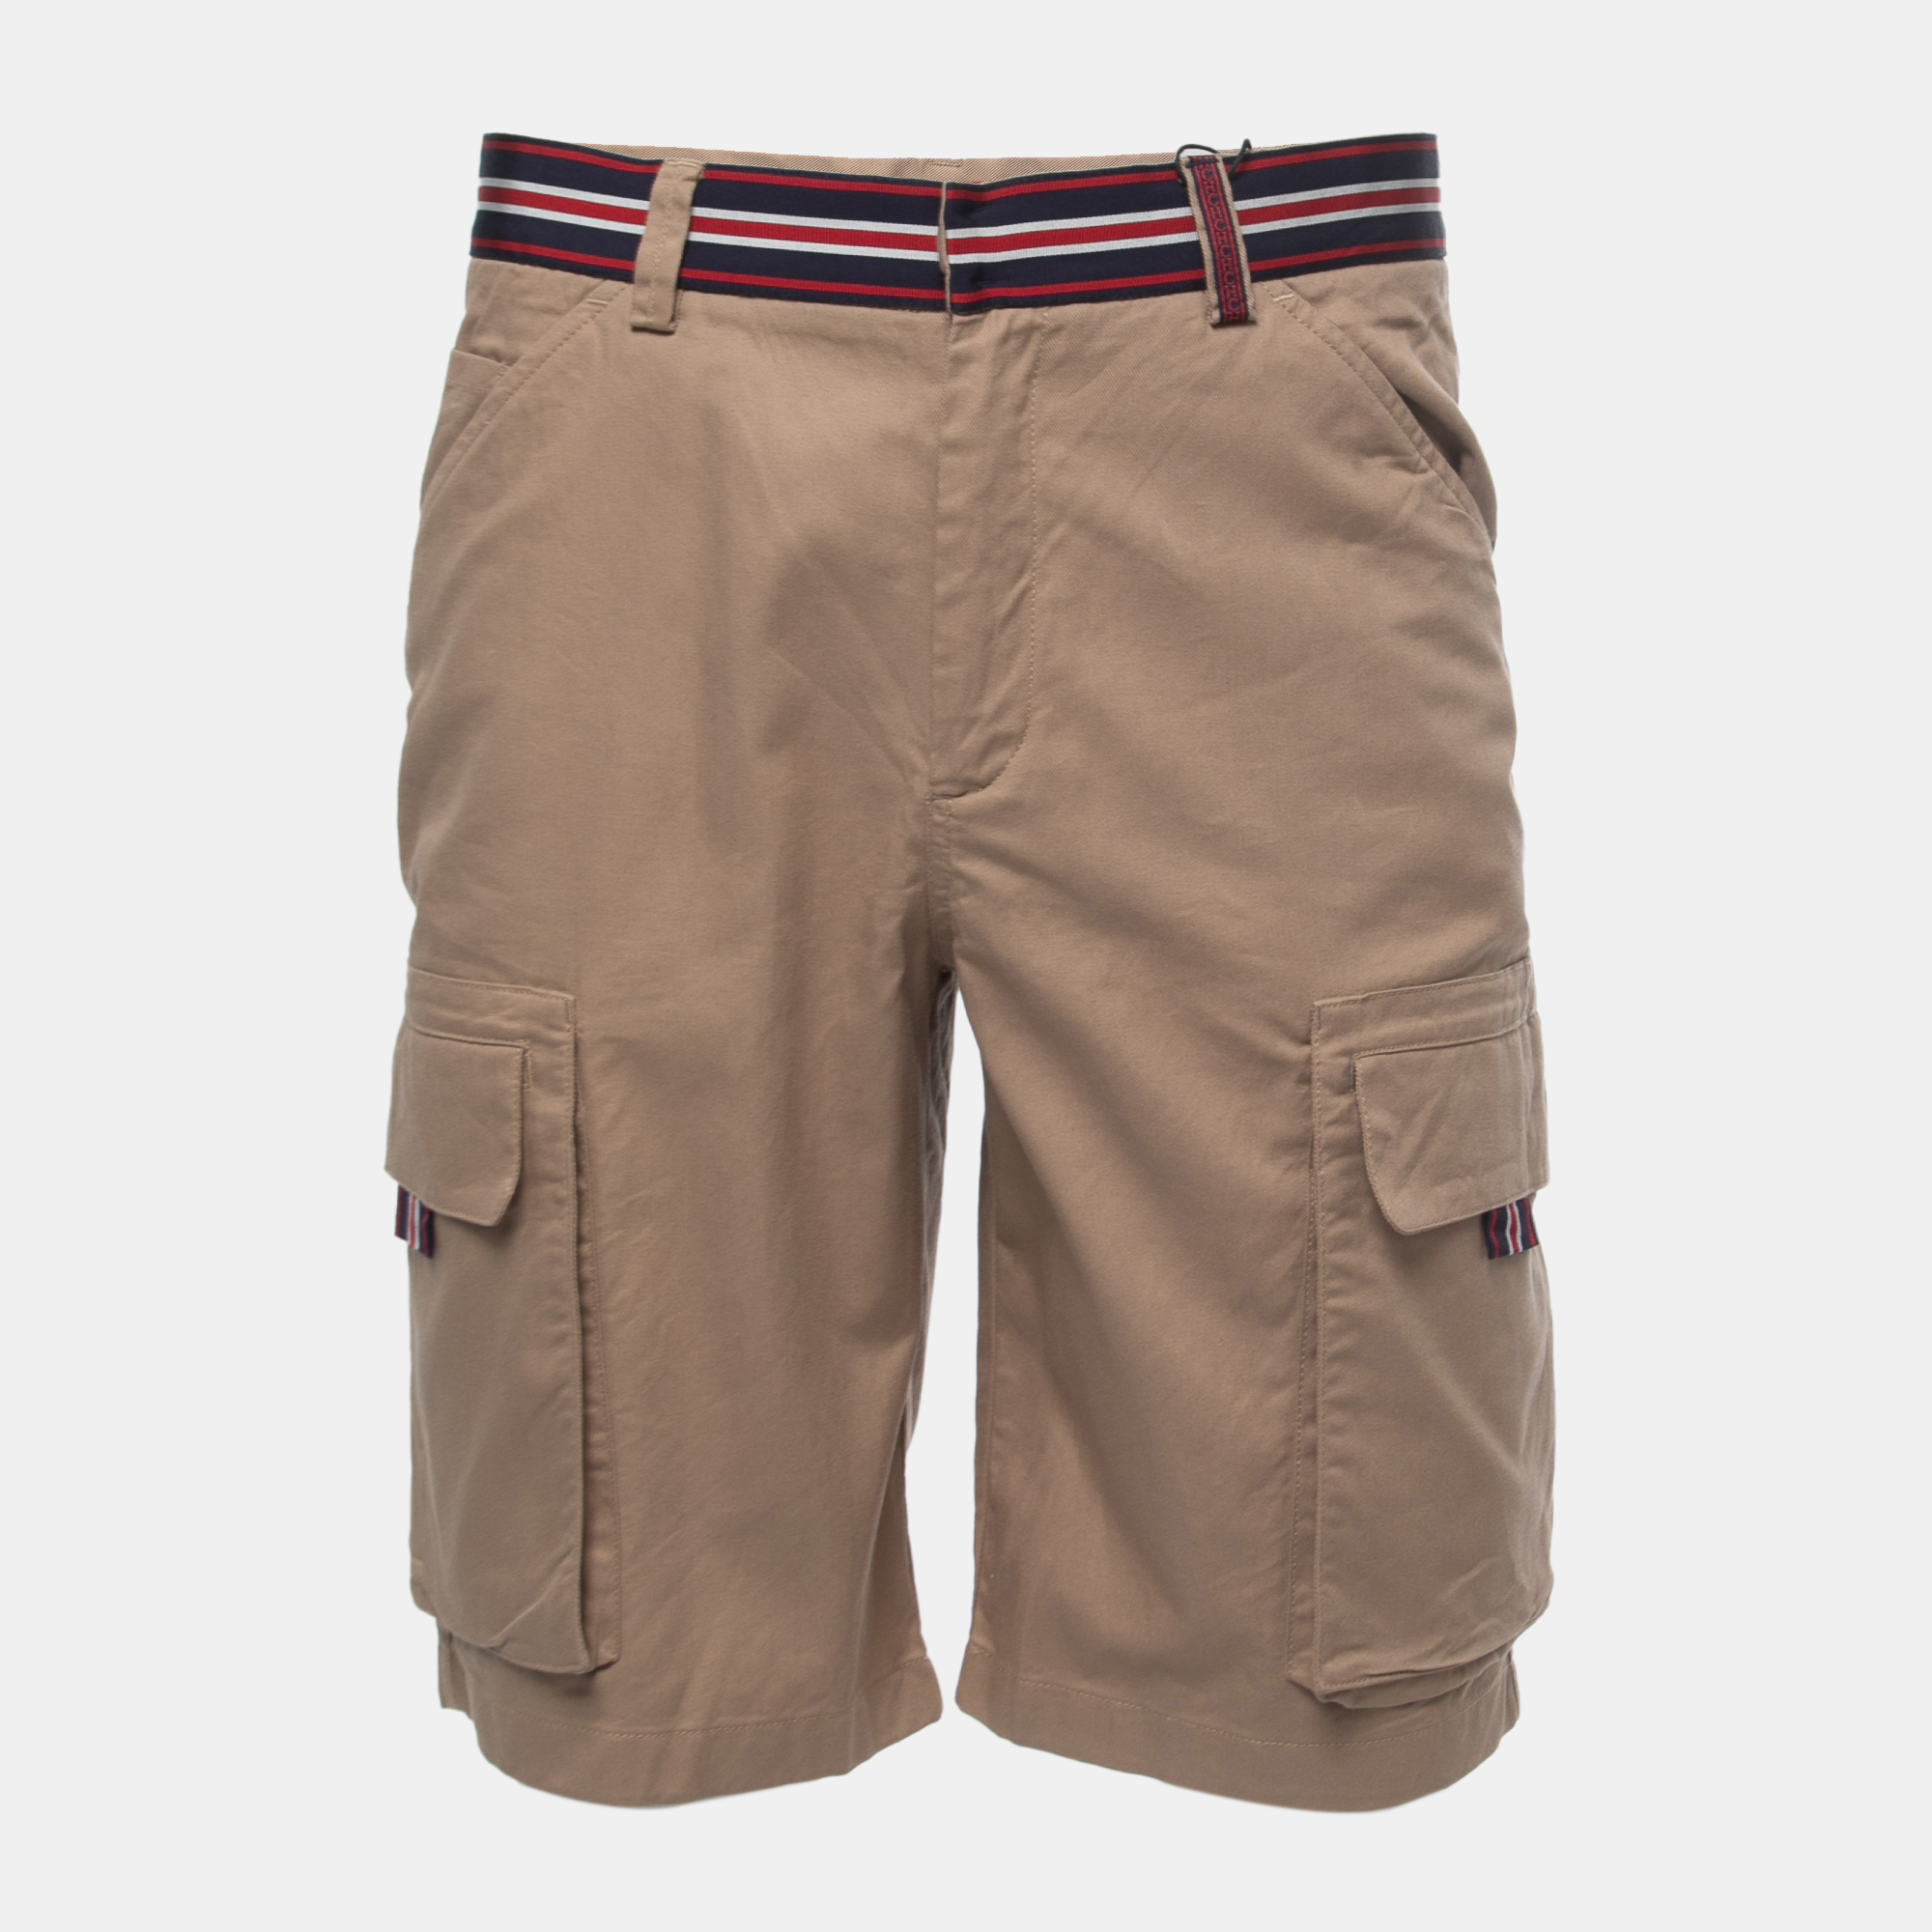 Beachy vacations call for a stylish pair of shorts like this. Stitched using high quality fabric this pair of shorts is styled with classic details and has a superb length. Wear it with T shirts.